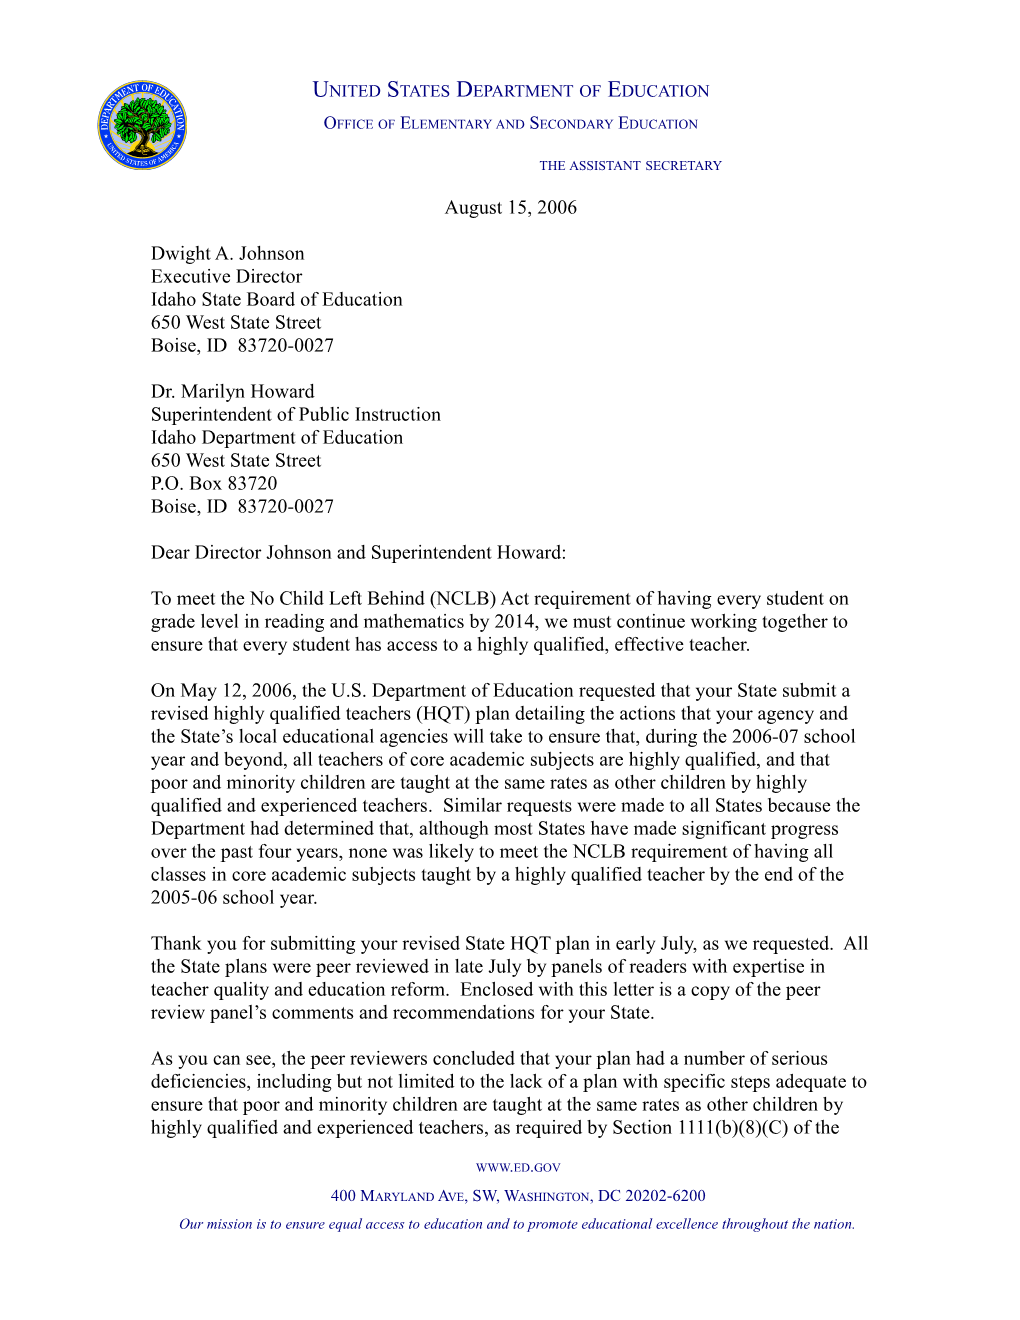 Idaho Letter to Chief State School Officer Regarding the Peer Review Comments of the Highly